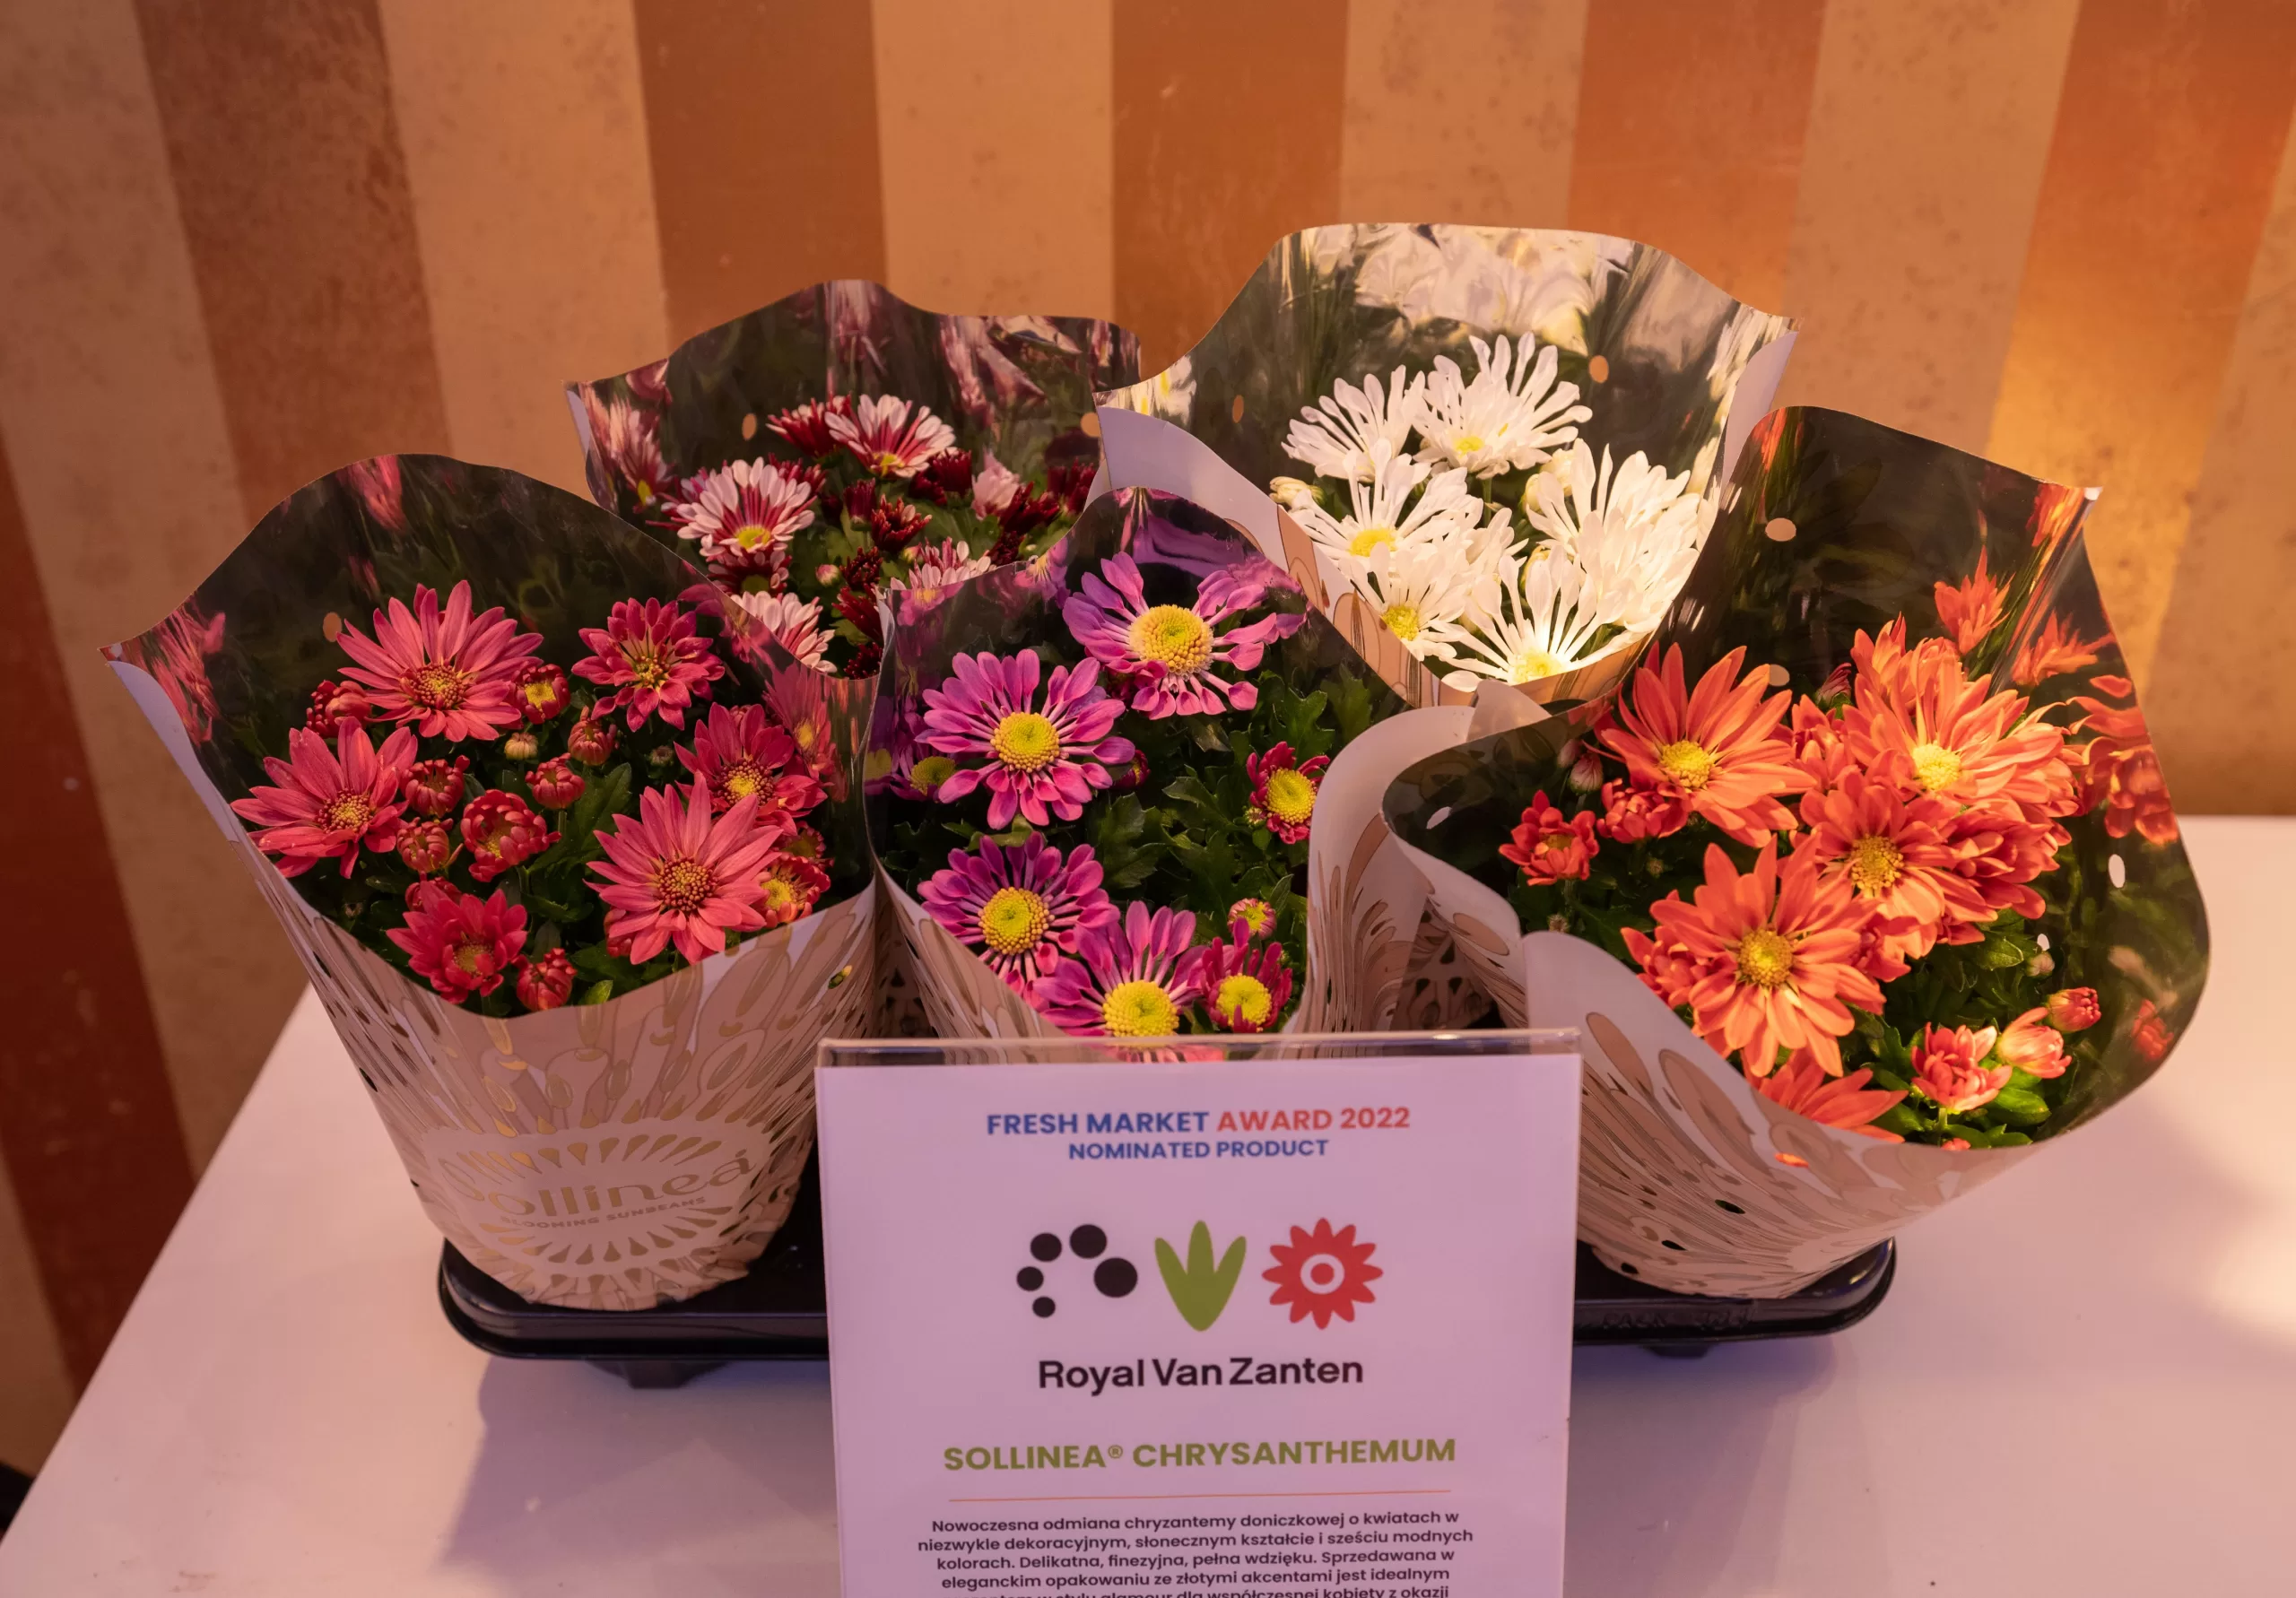 Chrysanthemum Sollinea® one of the nominated products